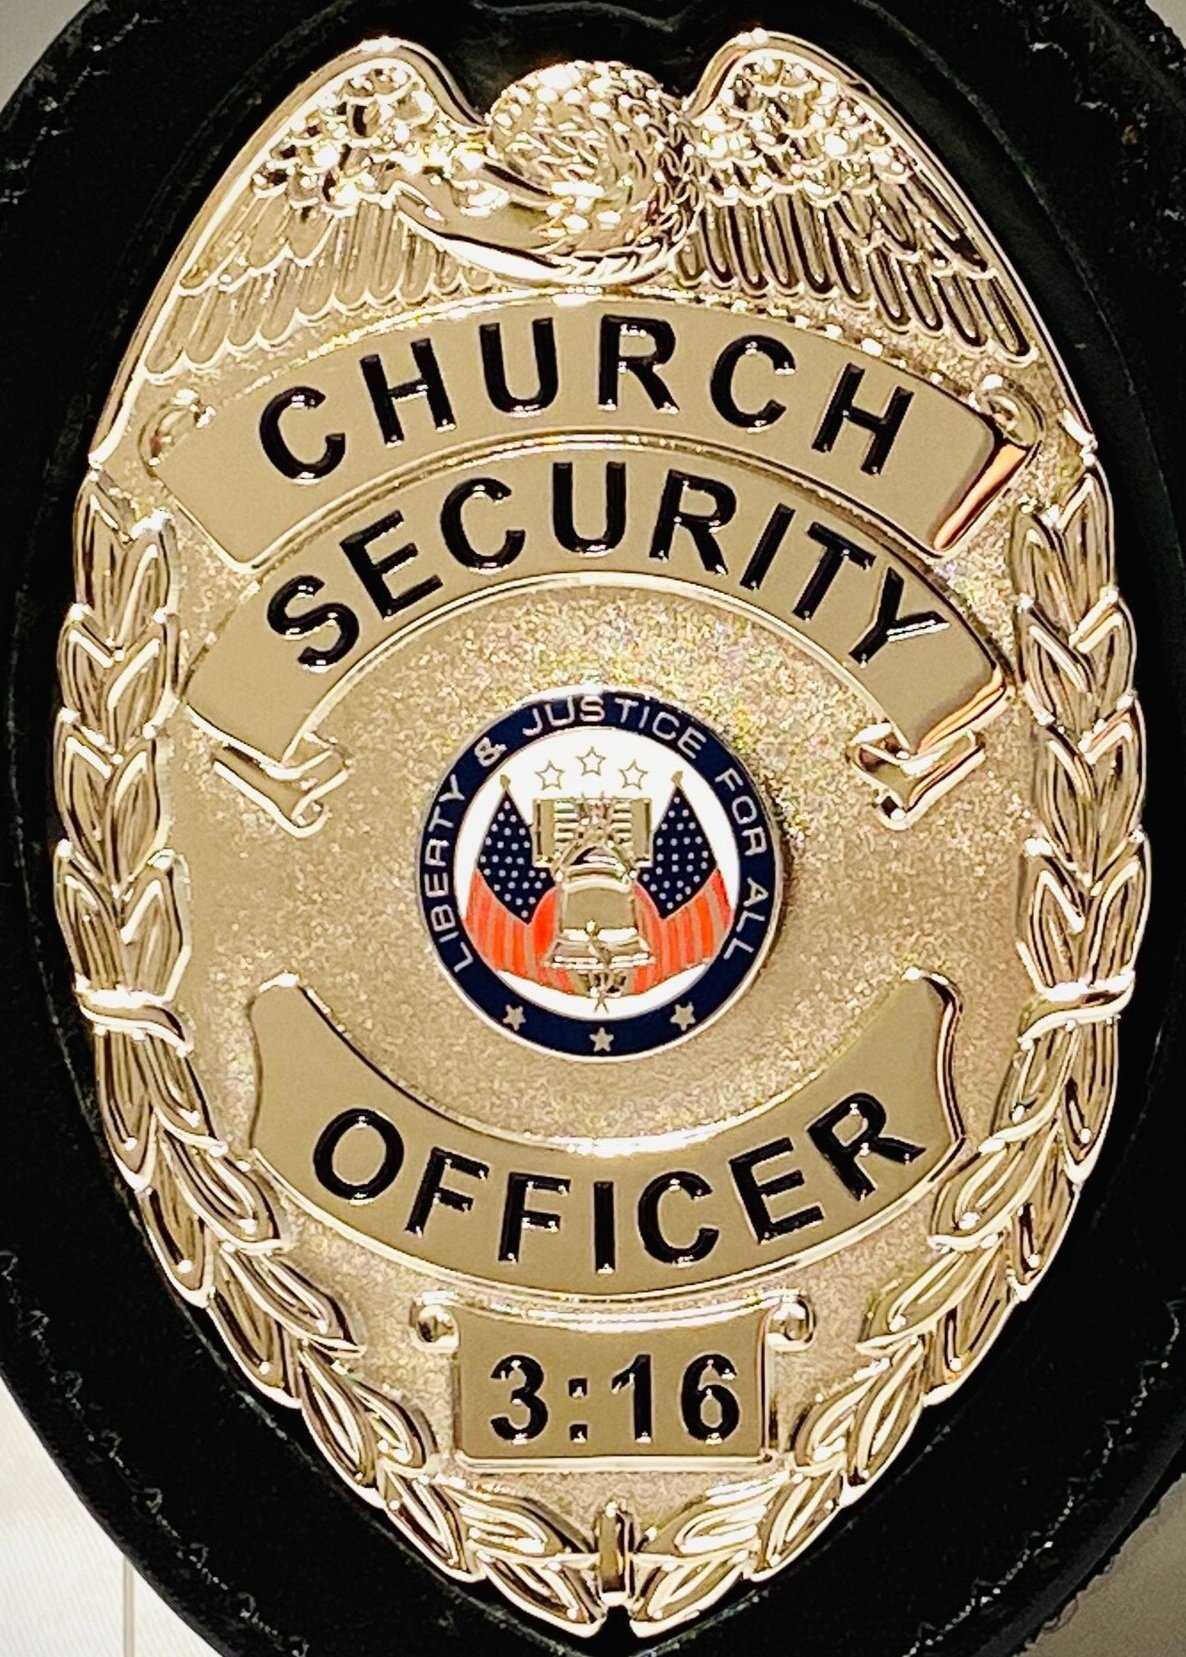 Church Security (Gold or Silver)